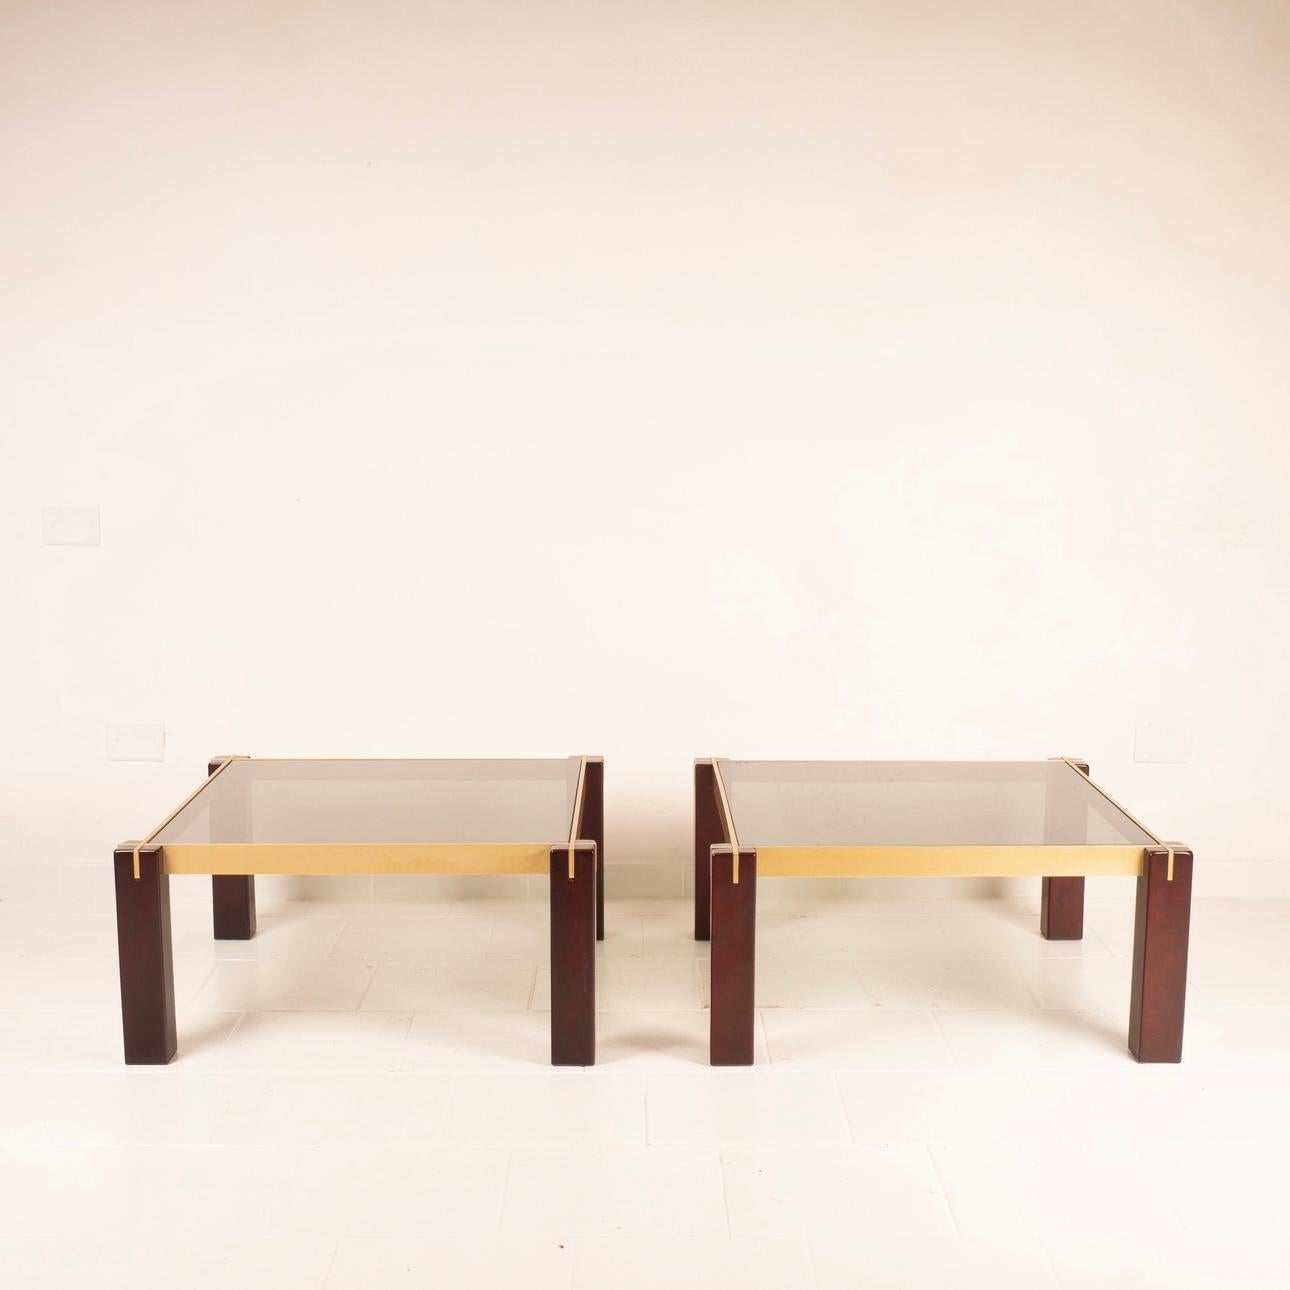 Exclusive pair of low tables from the 